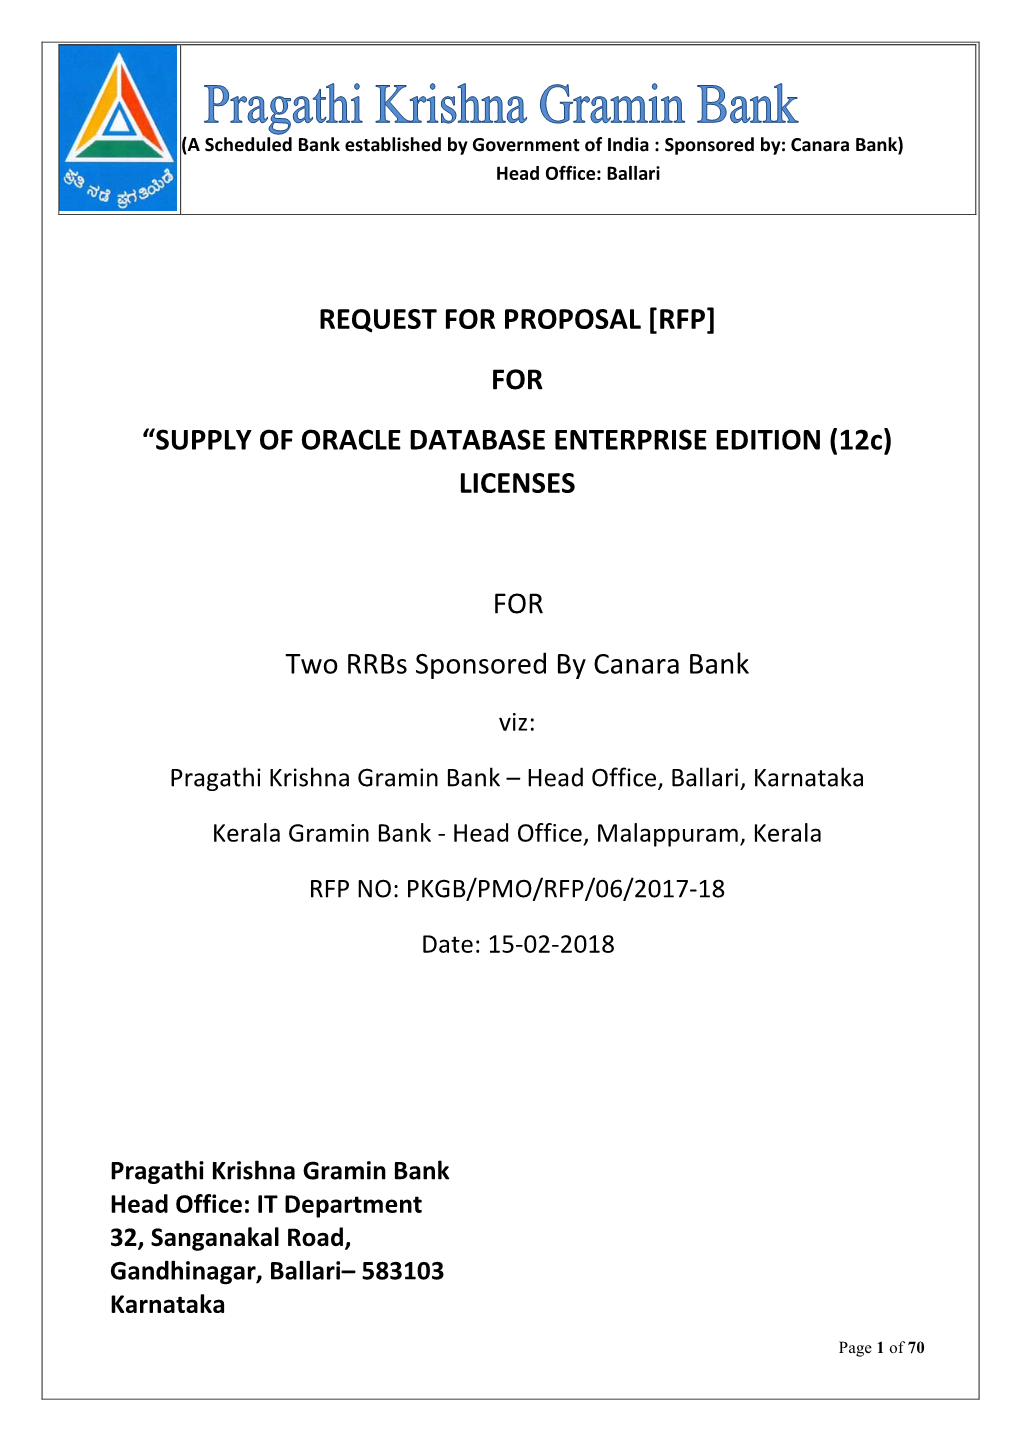 RFP] for “SUPPLY of ORACLE DATABASE ENTERPRISE EDITION (12C) LICENSES